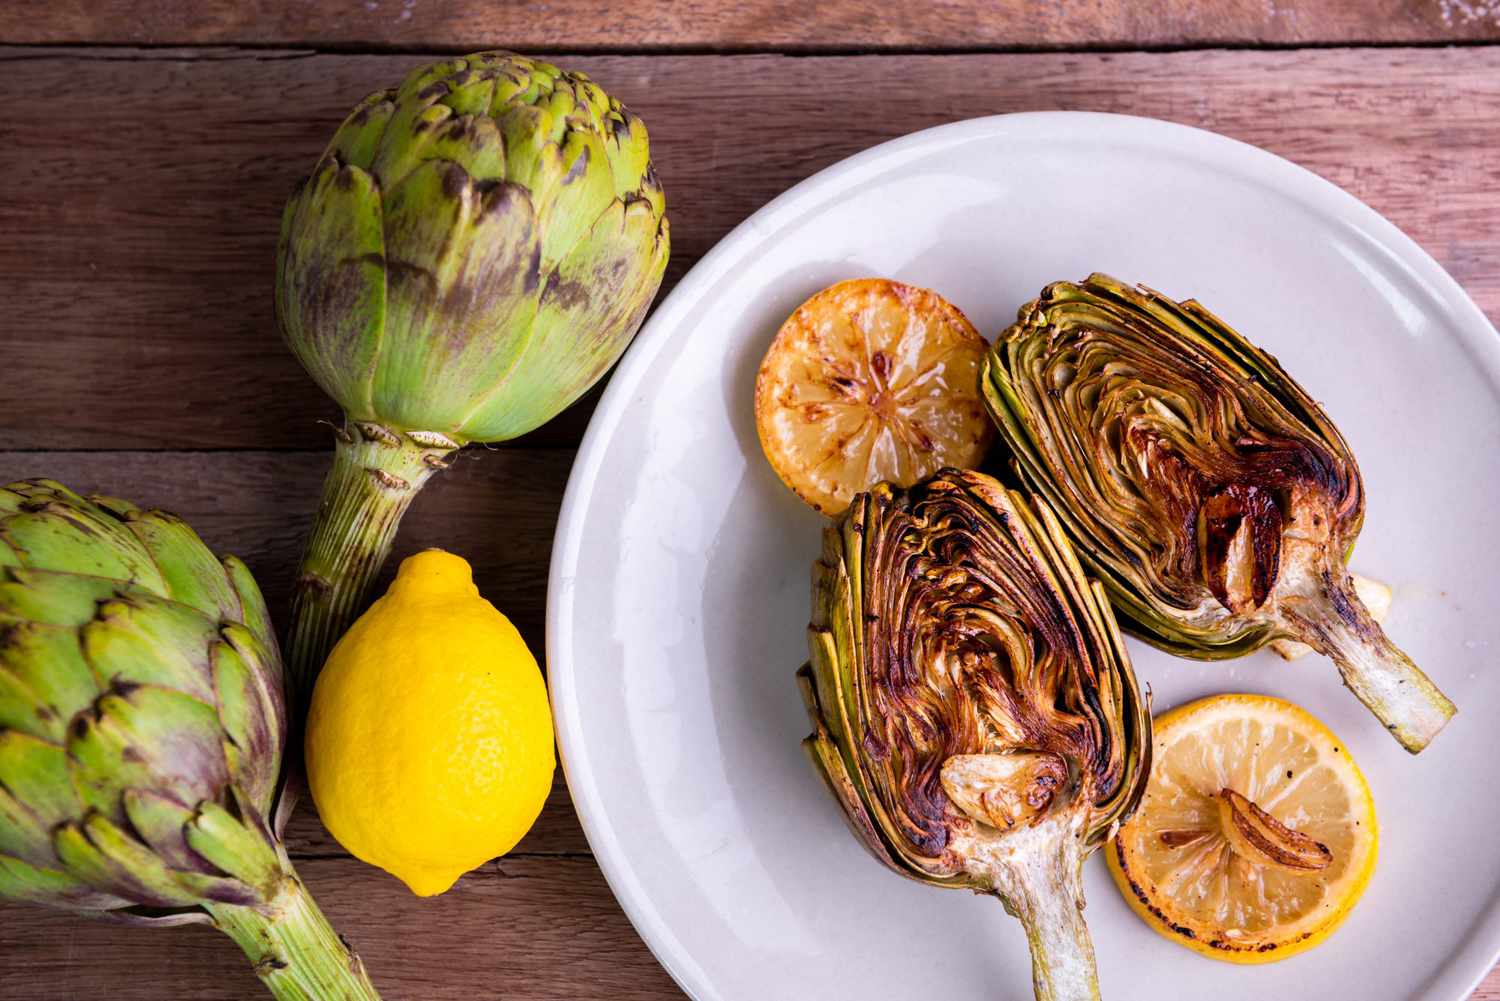 Grilled artichokes roasted